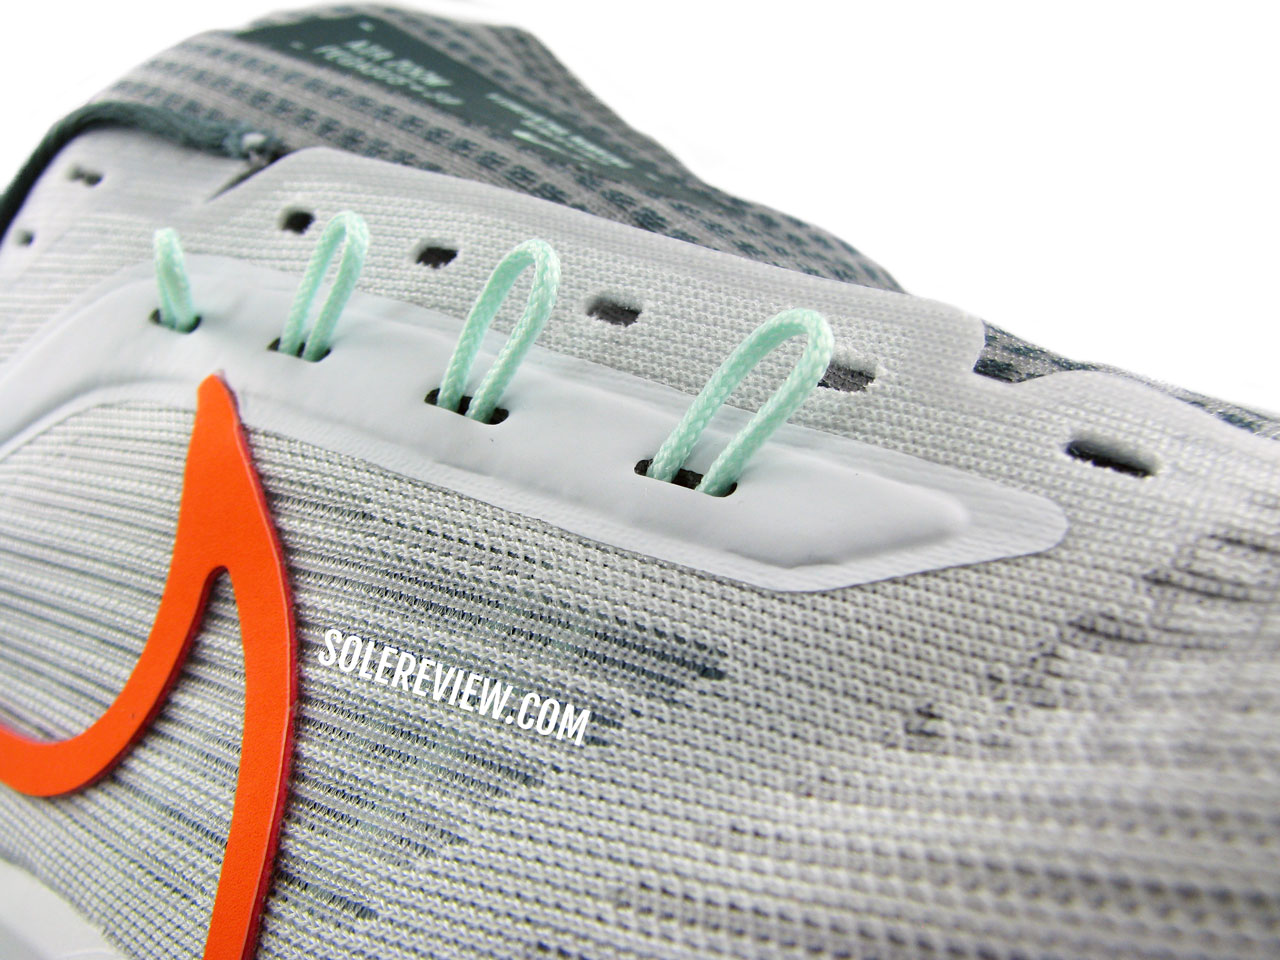 The Flywire lacing of the Nike Pegasus 39.